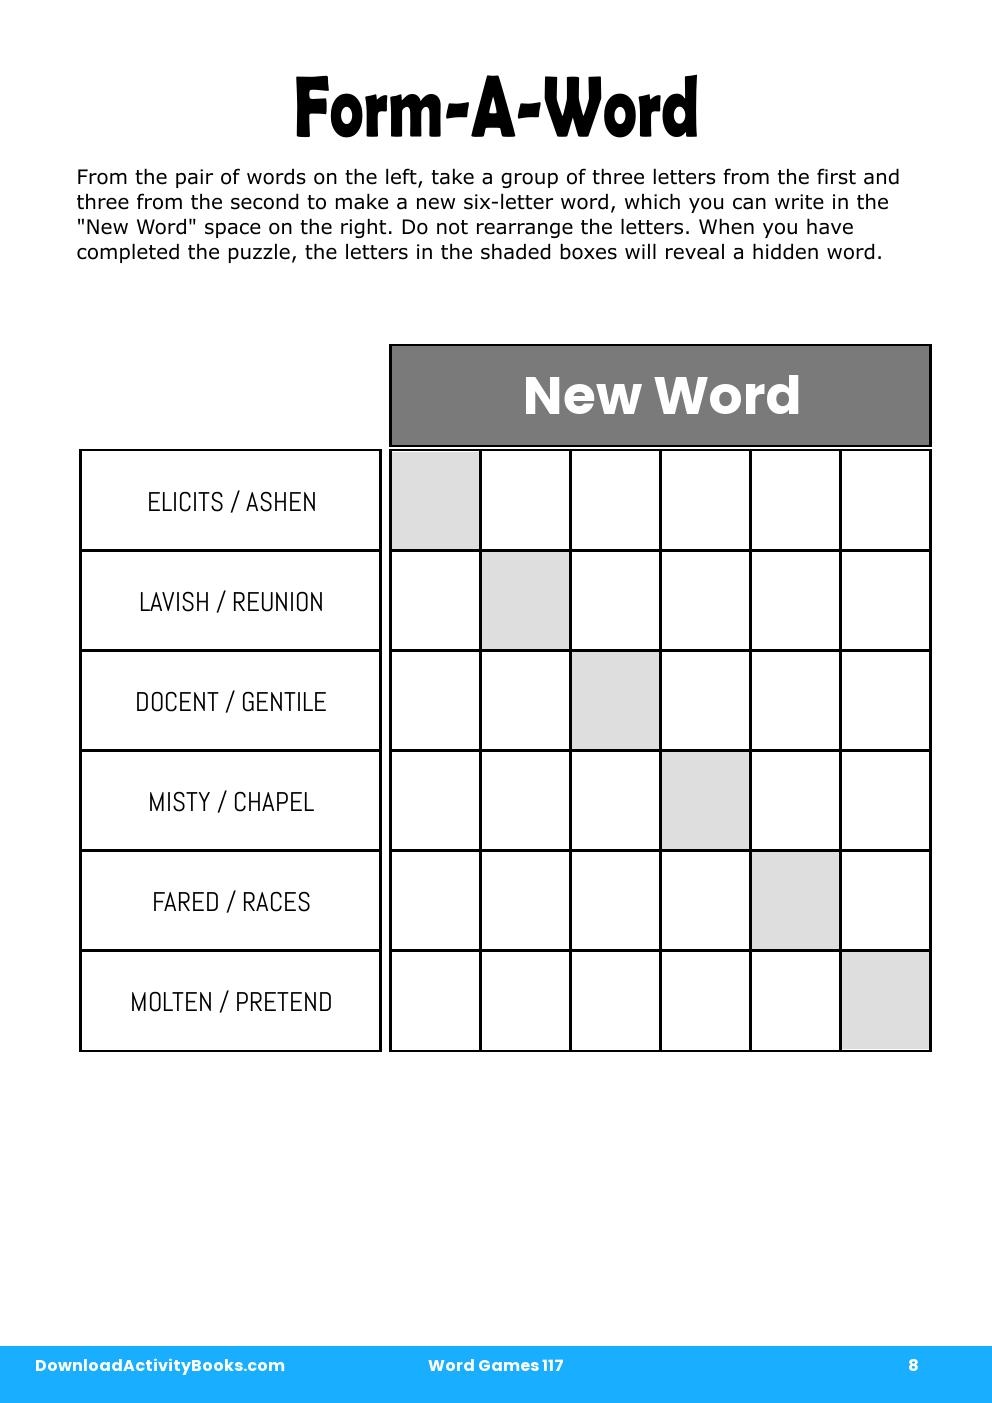 Form-A-Word in Word Games 117